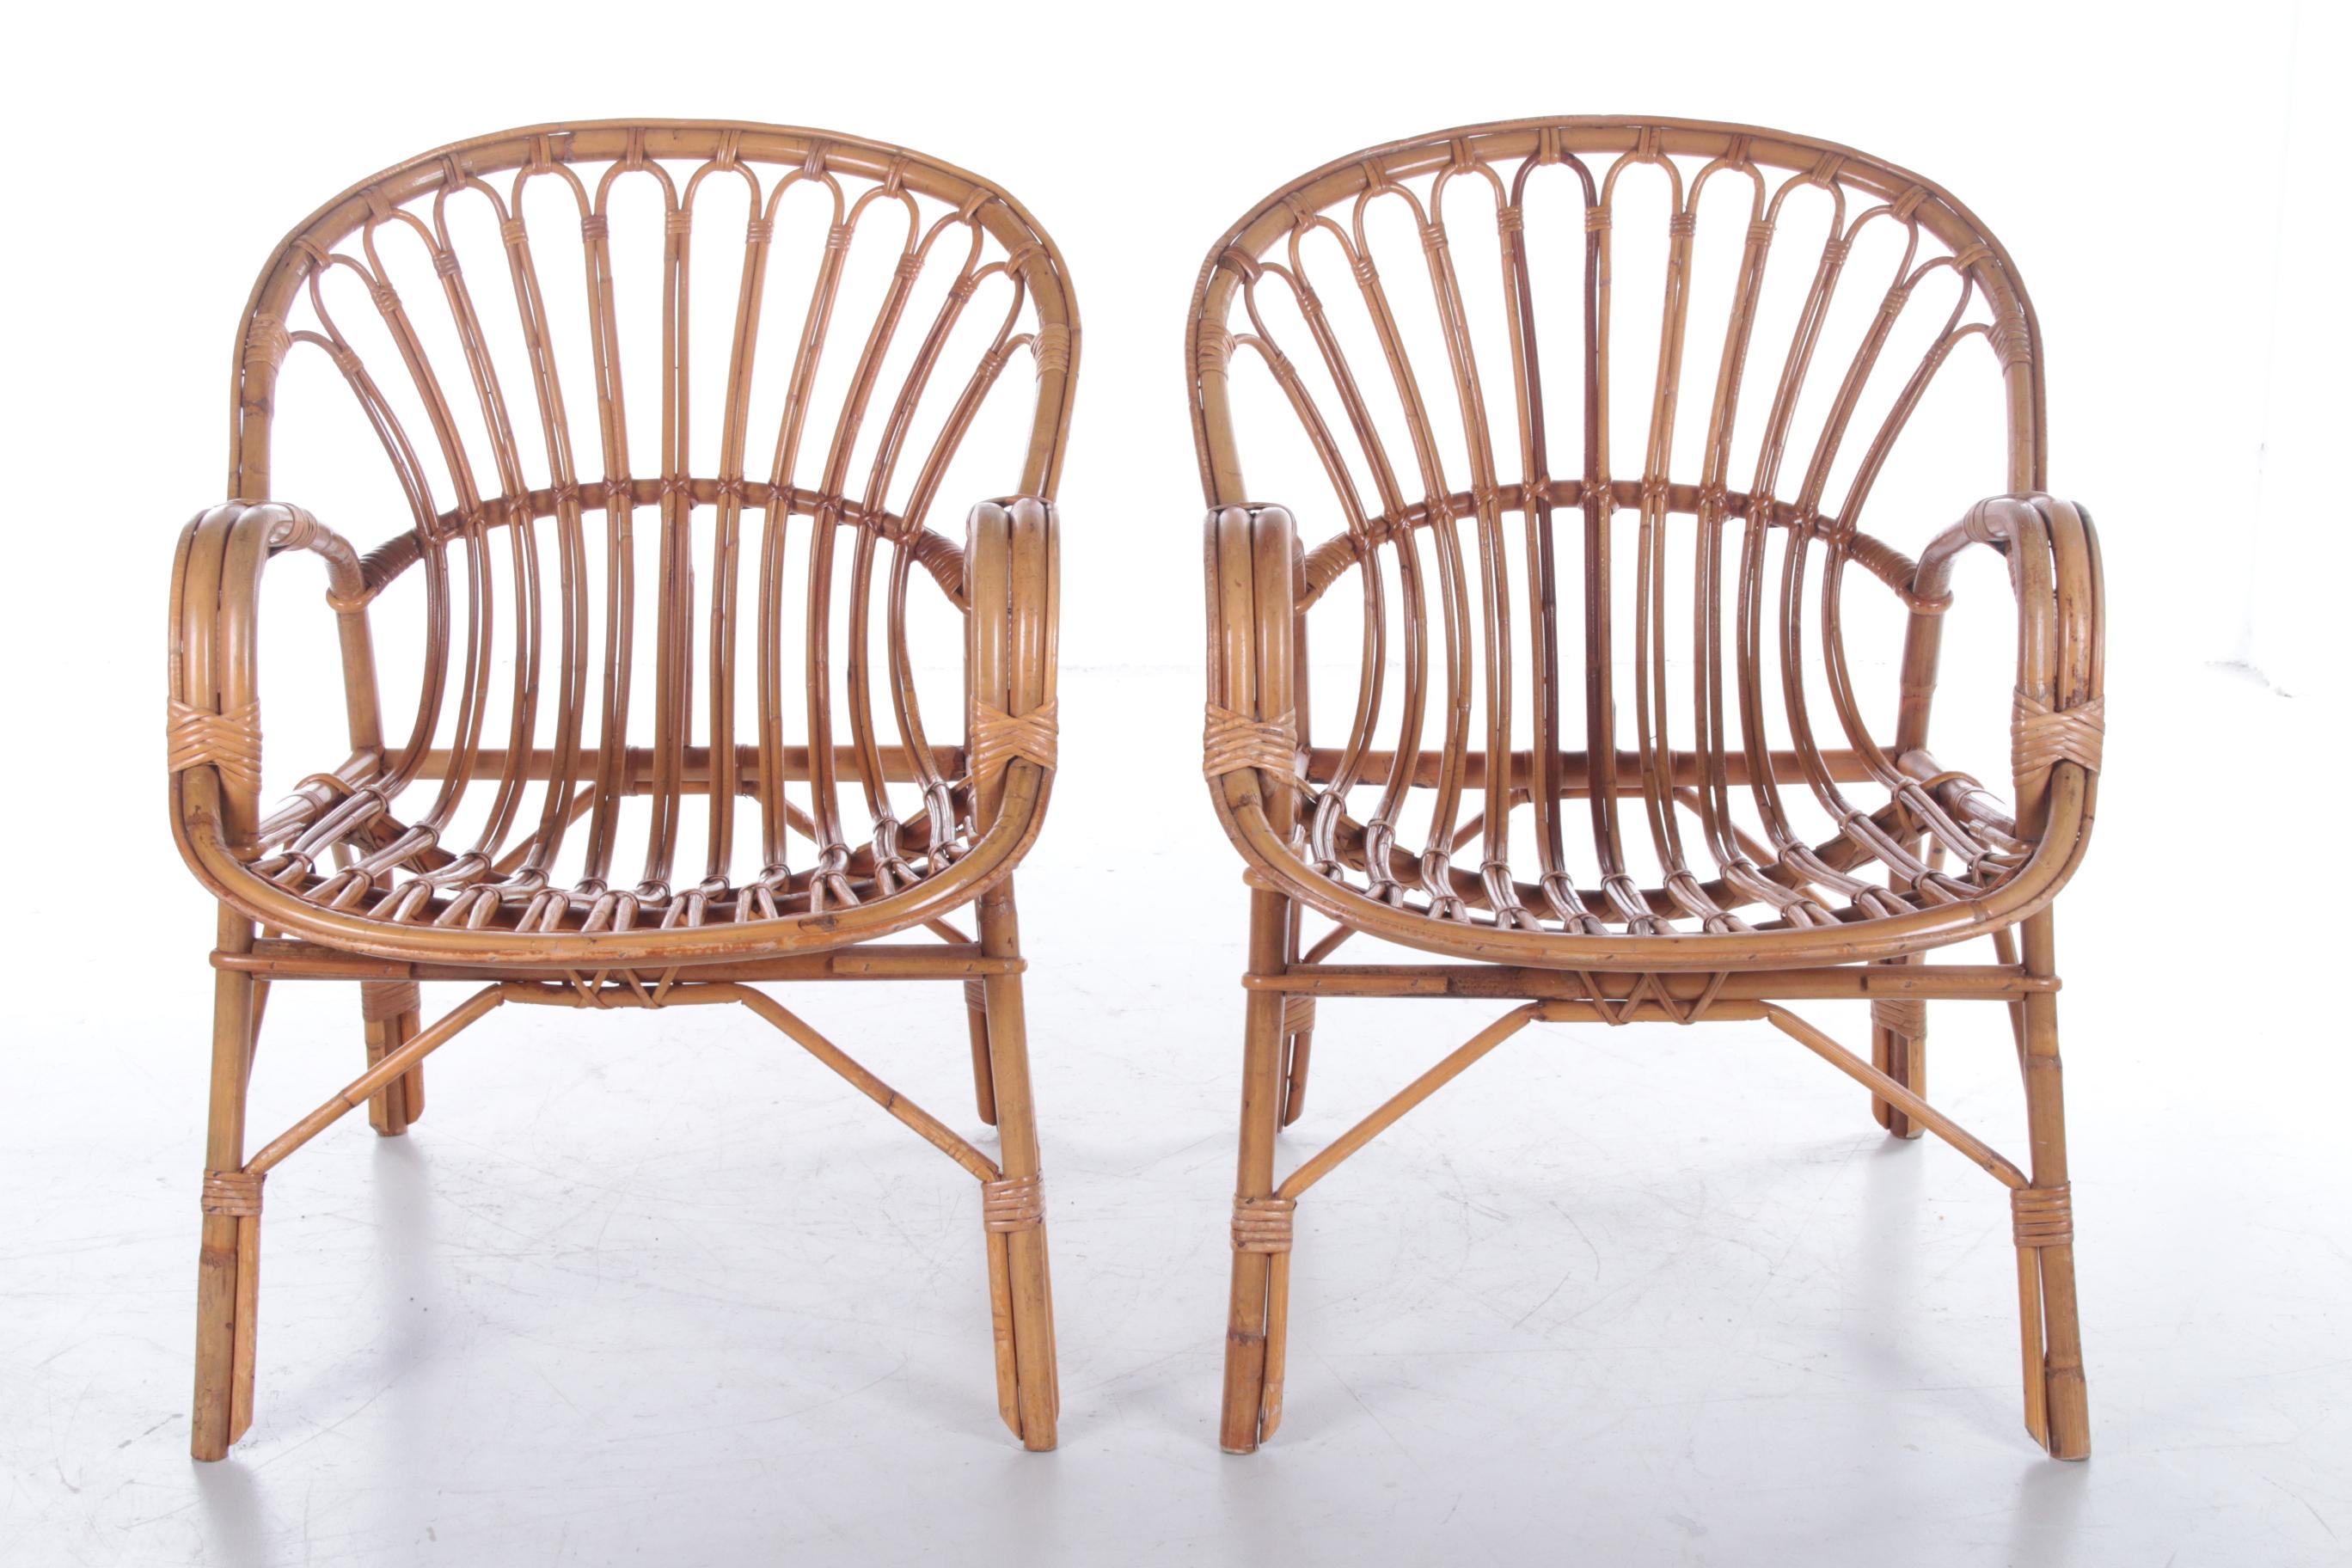 Mid-20th Century French Retro Vintage Bamboo Set of Armchairs from the 1960s